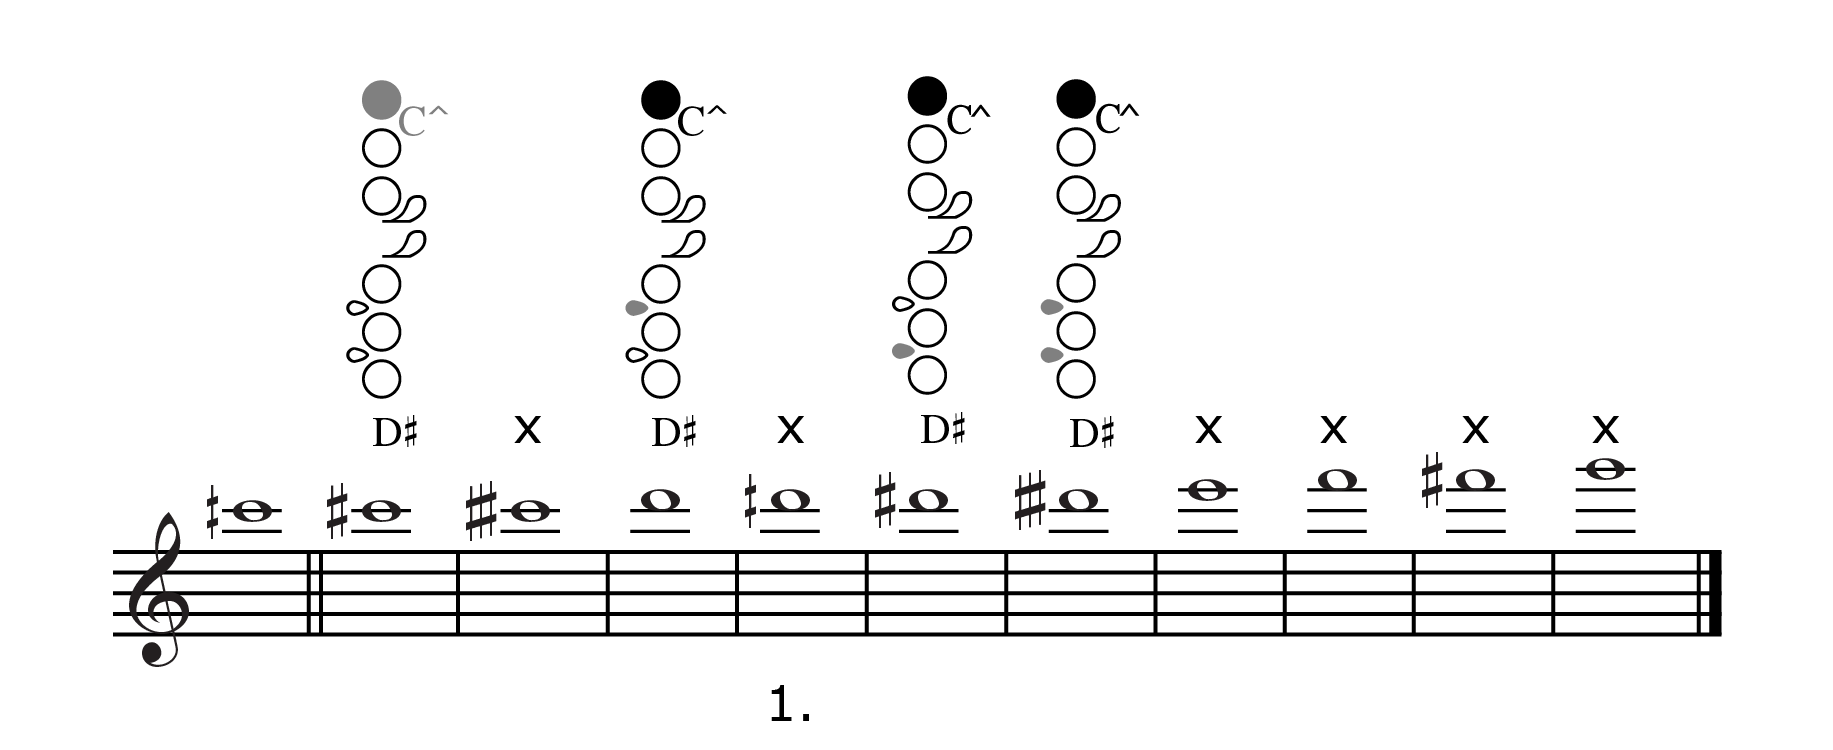 Flute Trill Chart Printable